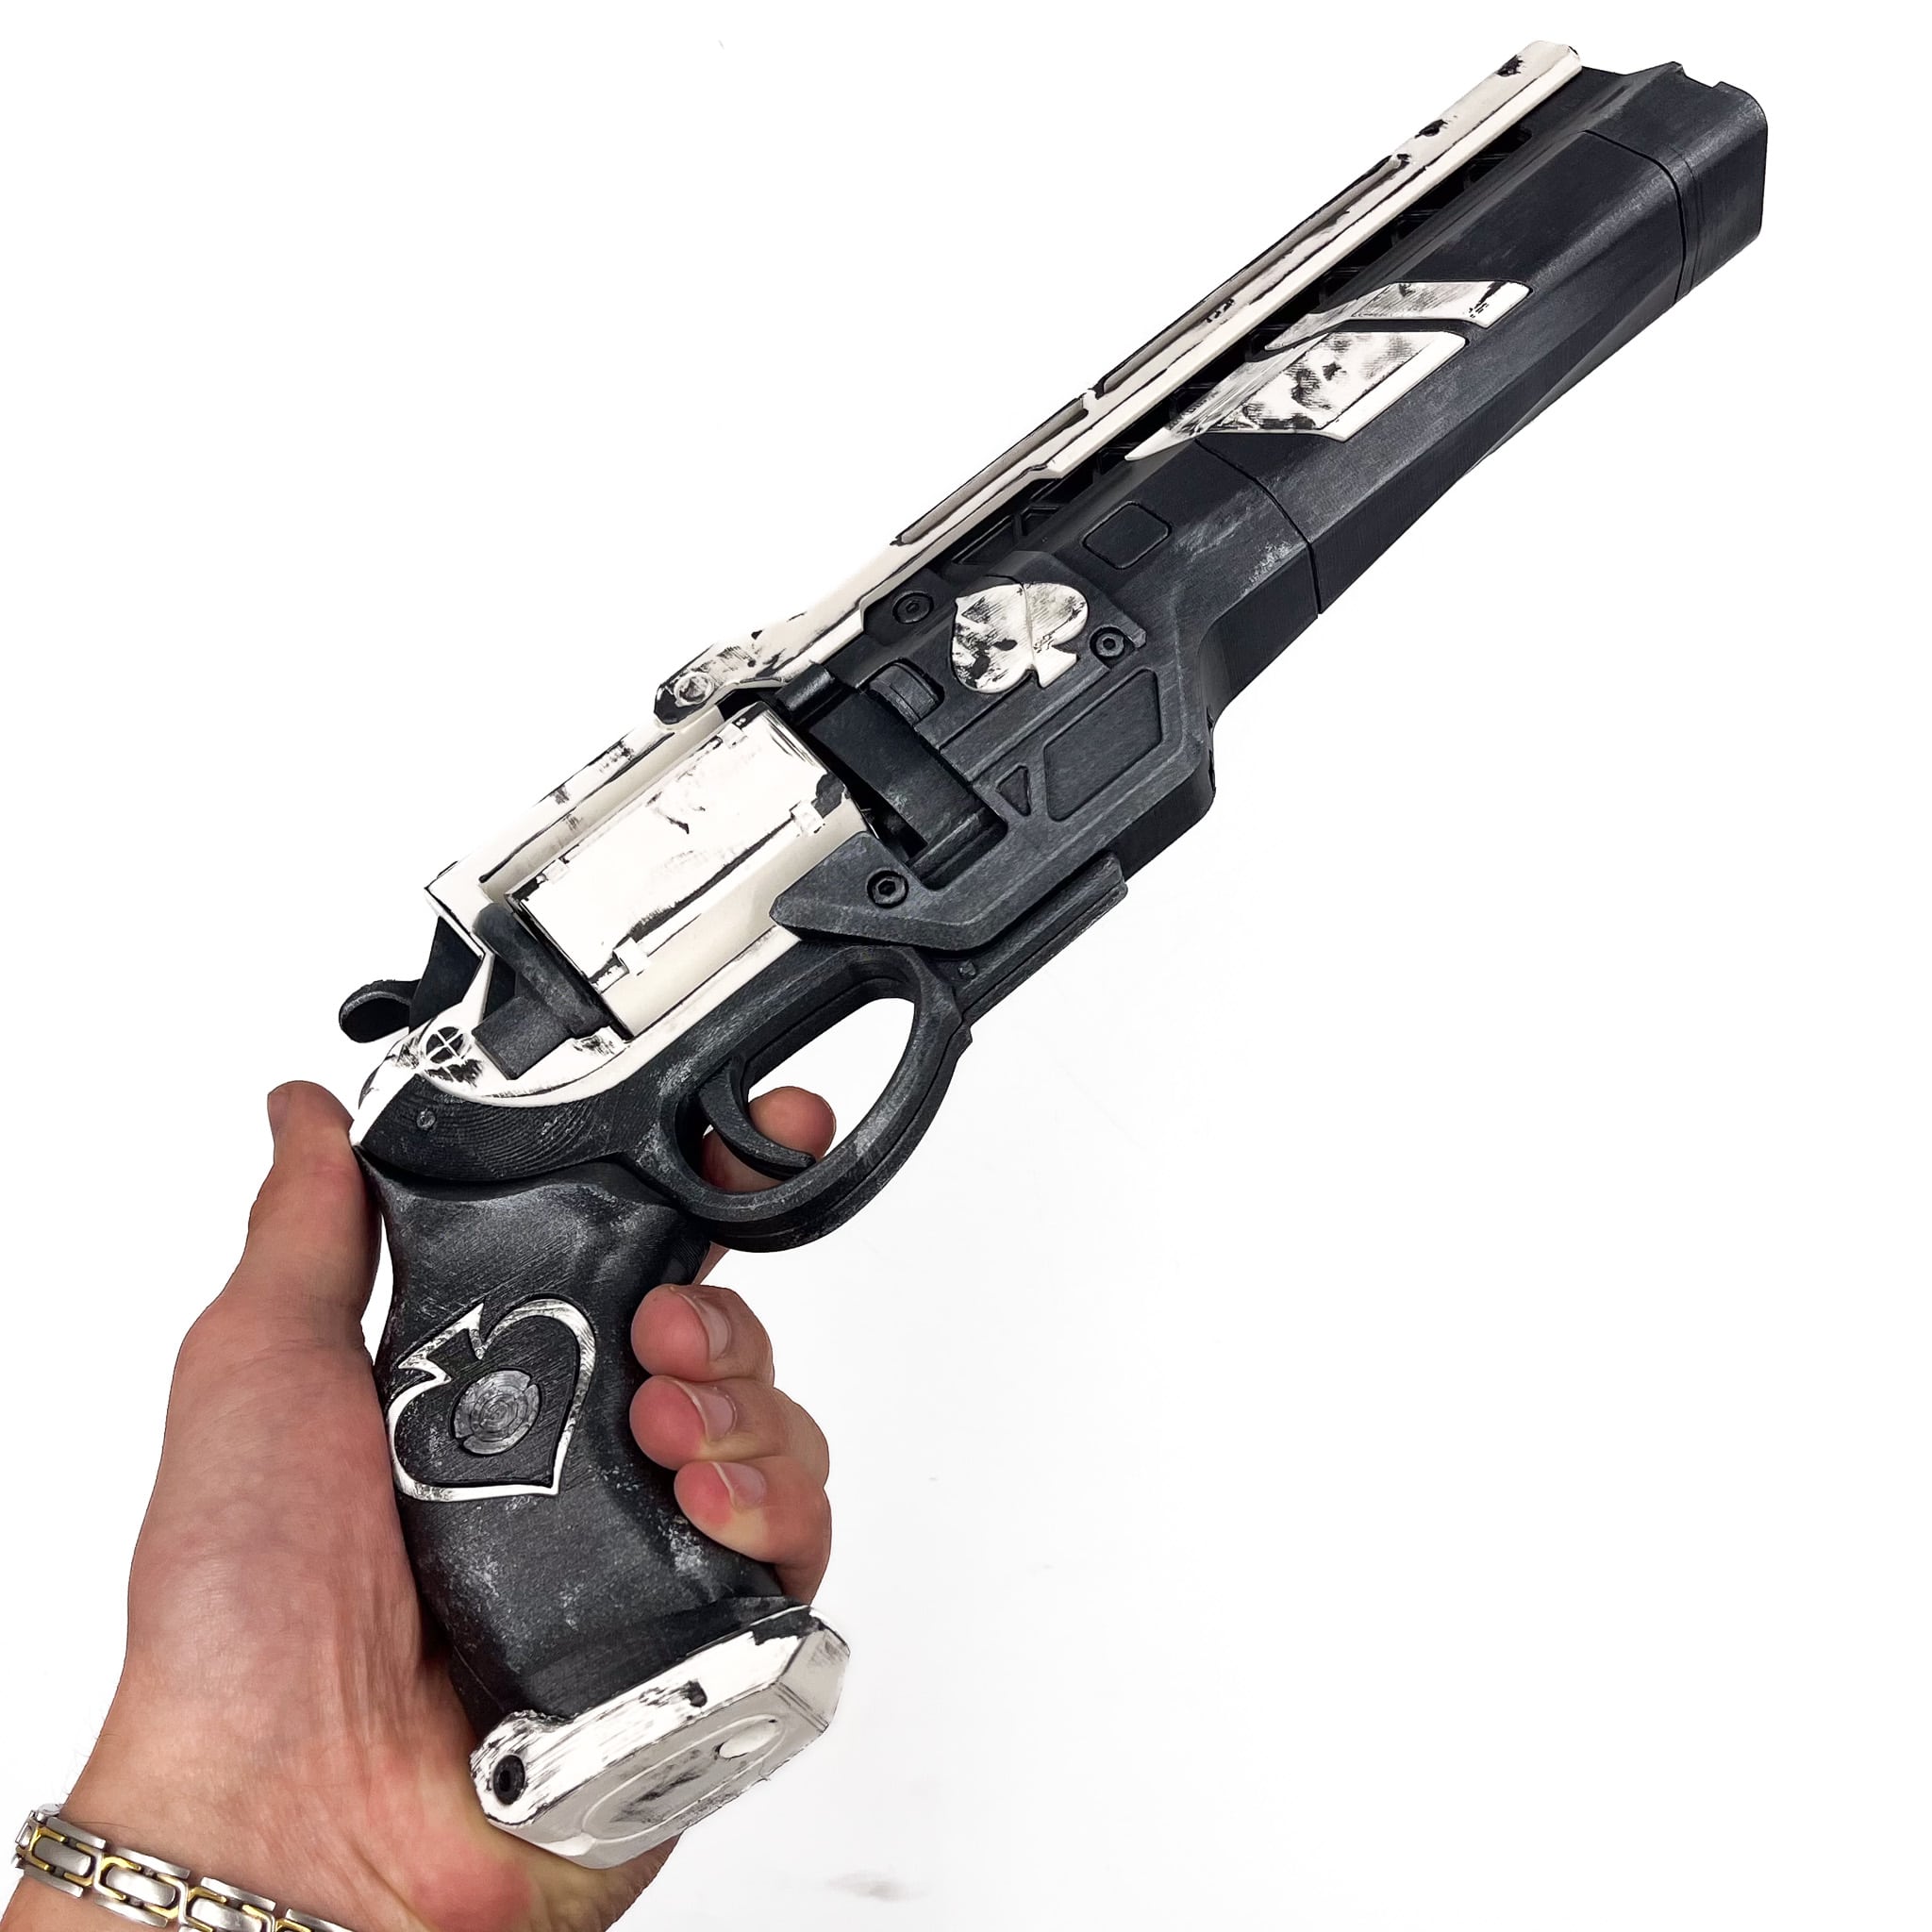 Destiny 2 Ace of Spades replica prop by Blasters4Masters